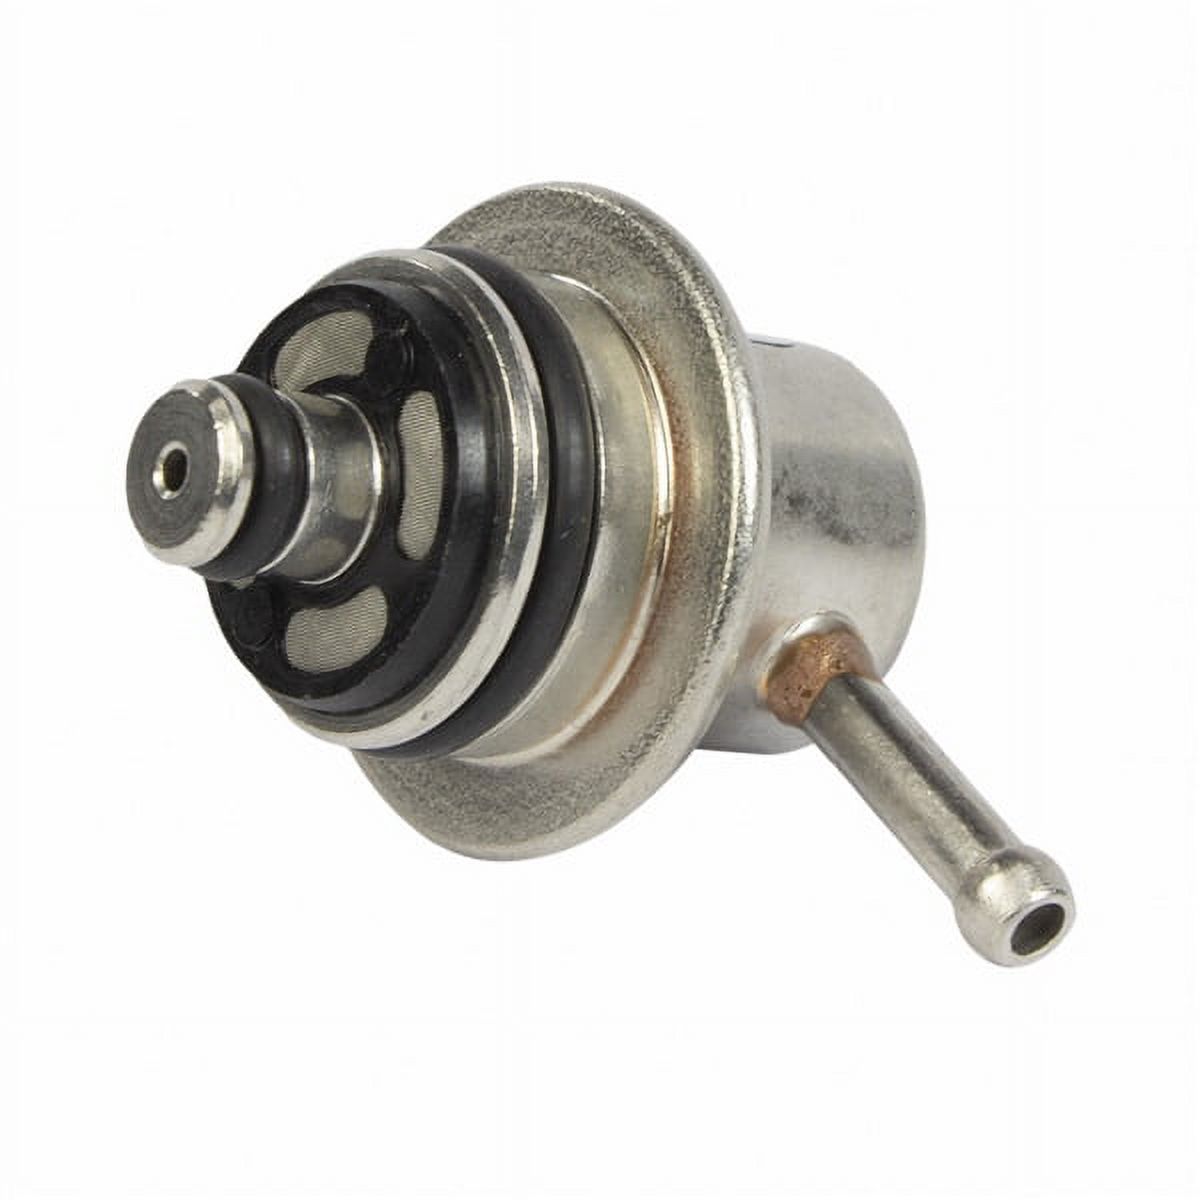 Motorcraft Fuel Injection Pressure Regulator CM-5296 Fits select: 1999-2003 FORD F150, 1999-2004 FORD F250 - image 4 of 4